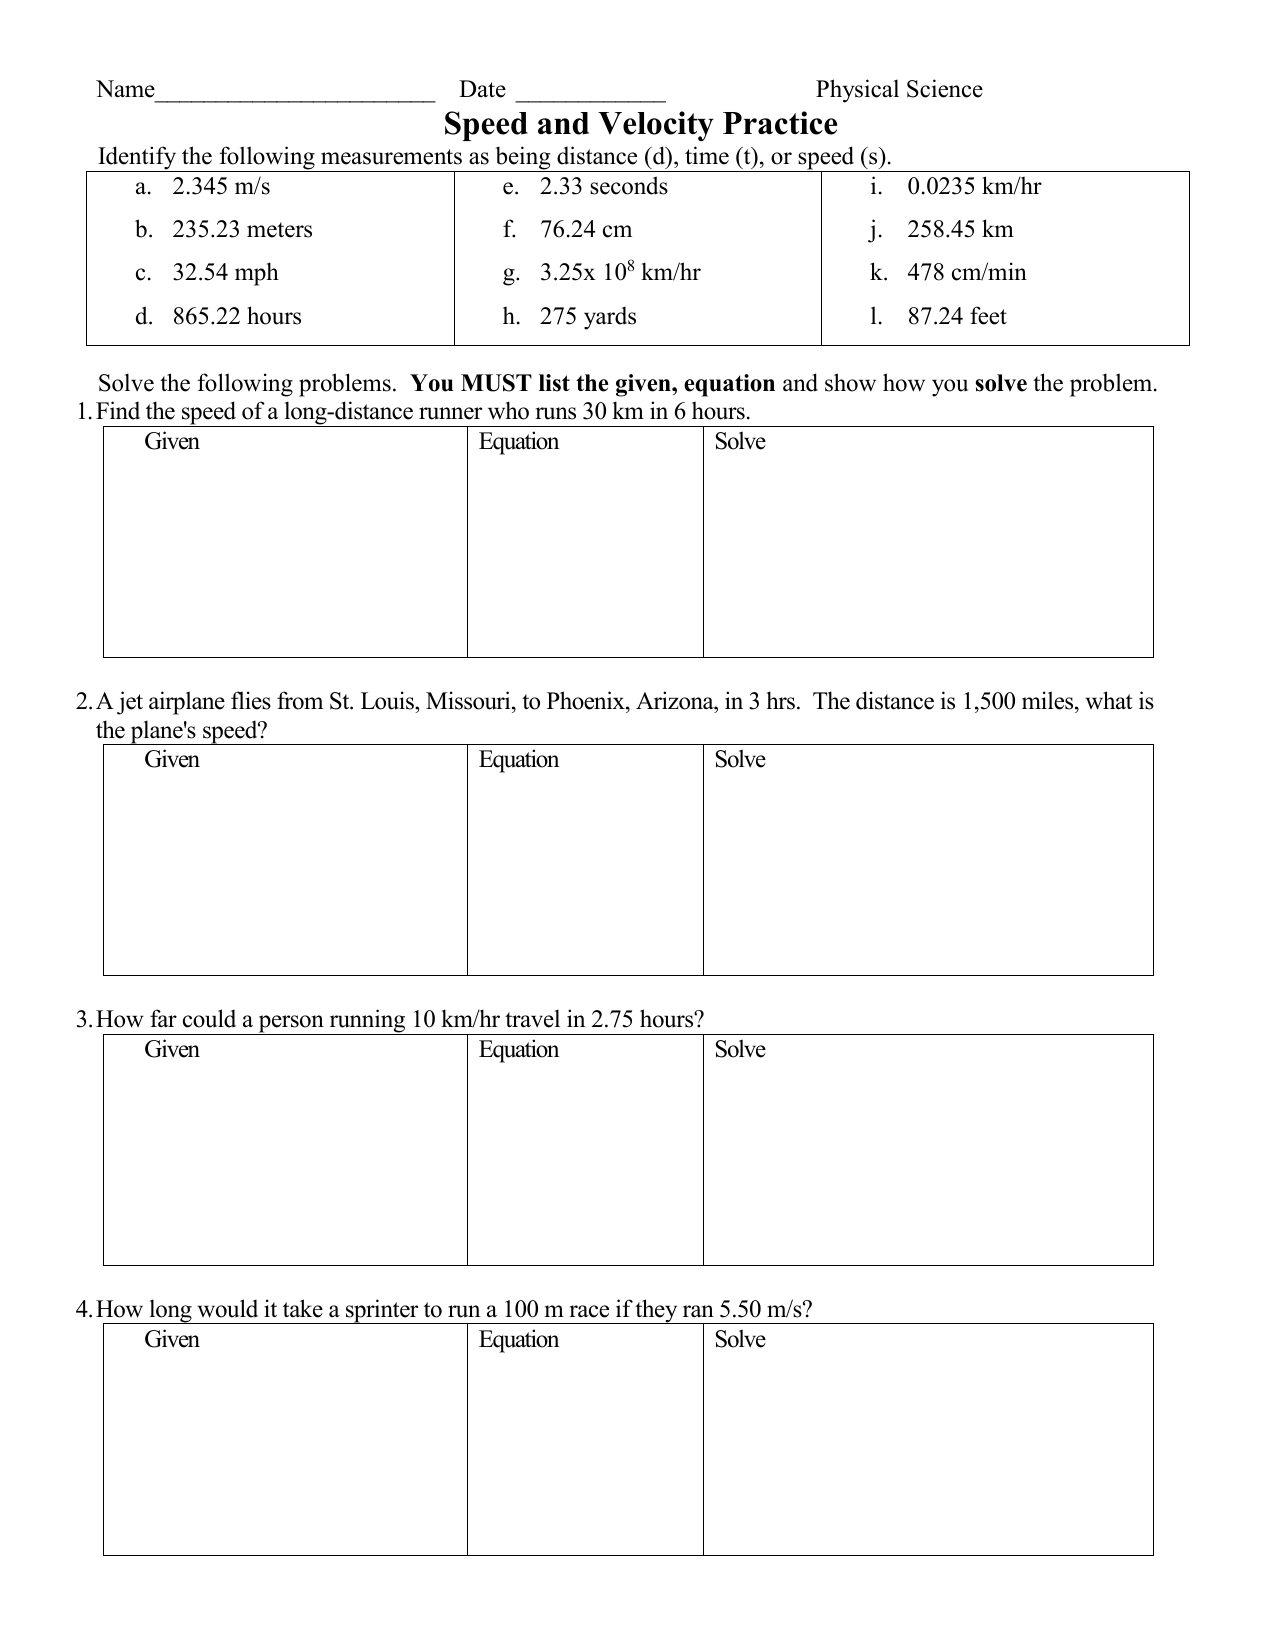 Speed and Velocity Practice Problems With Speed Practice Problems Worksheet